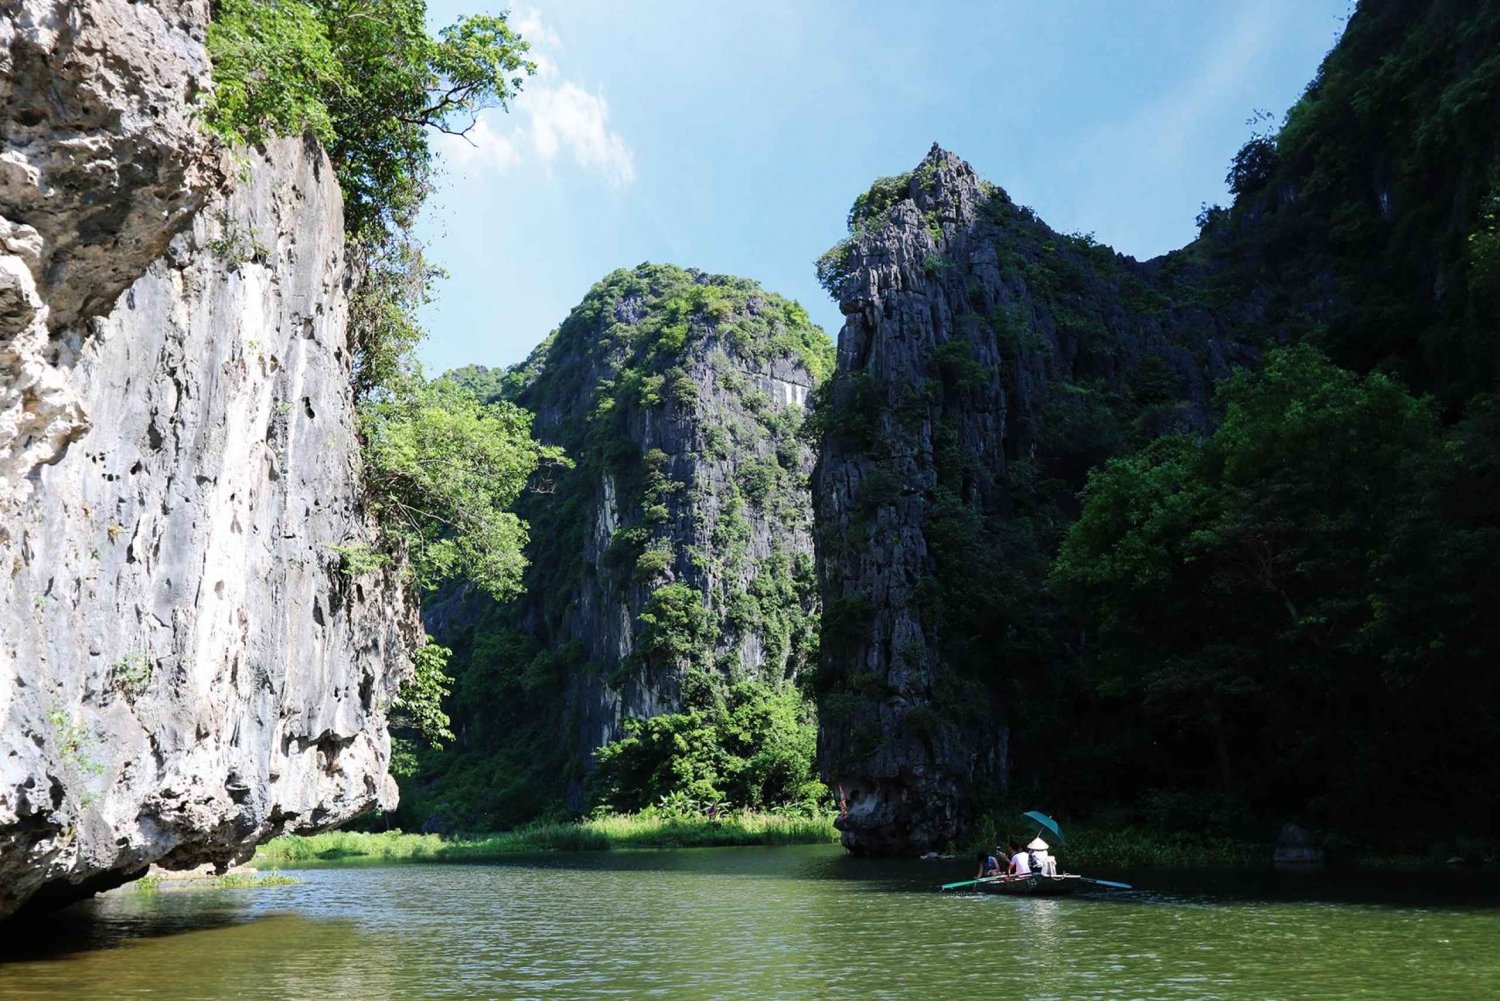 From Hanoi: 2-Day Ninh Binh Tour with 4 Star Hotel and Meals